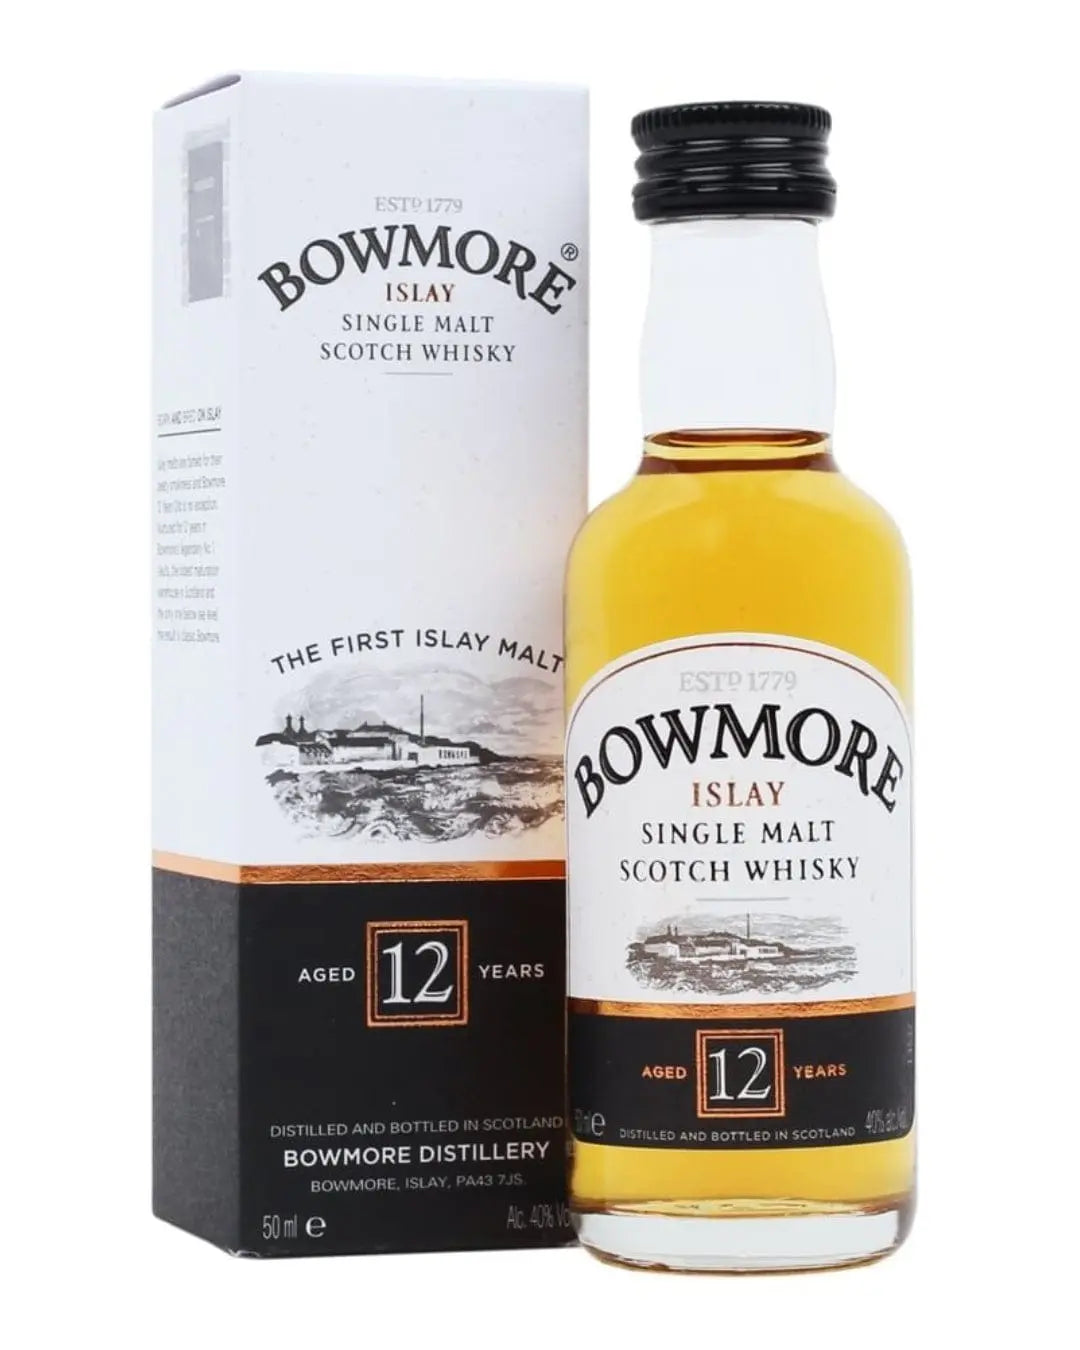 Bowmore 12 Year Old Whisky Miniatue, 5 cl Spirit Miniatures